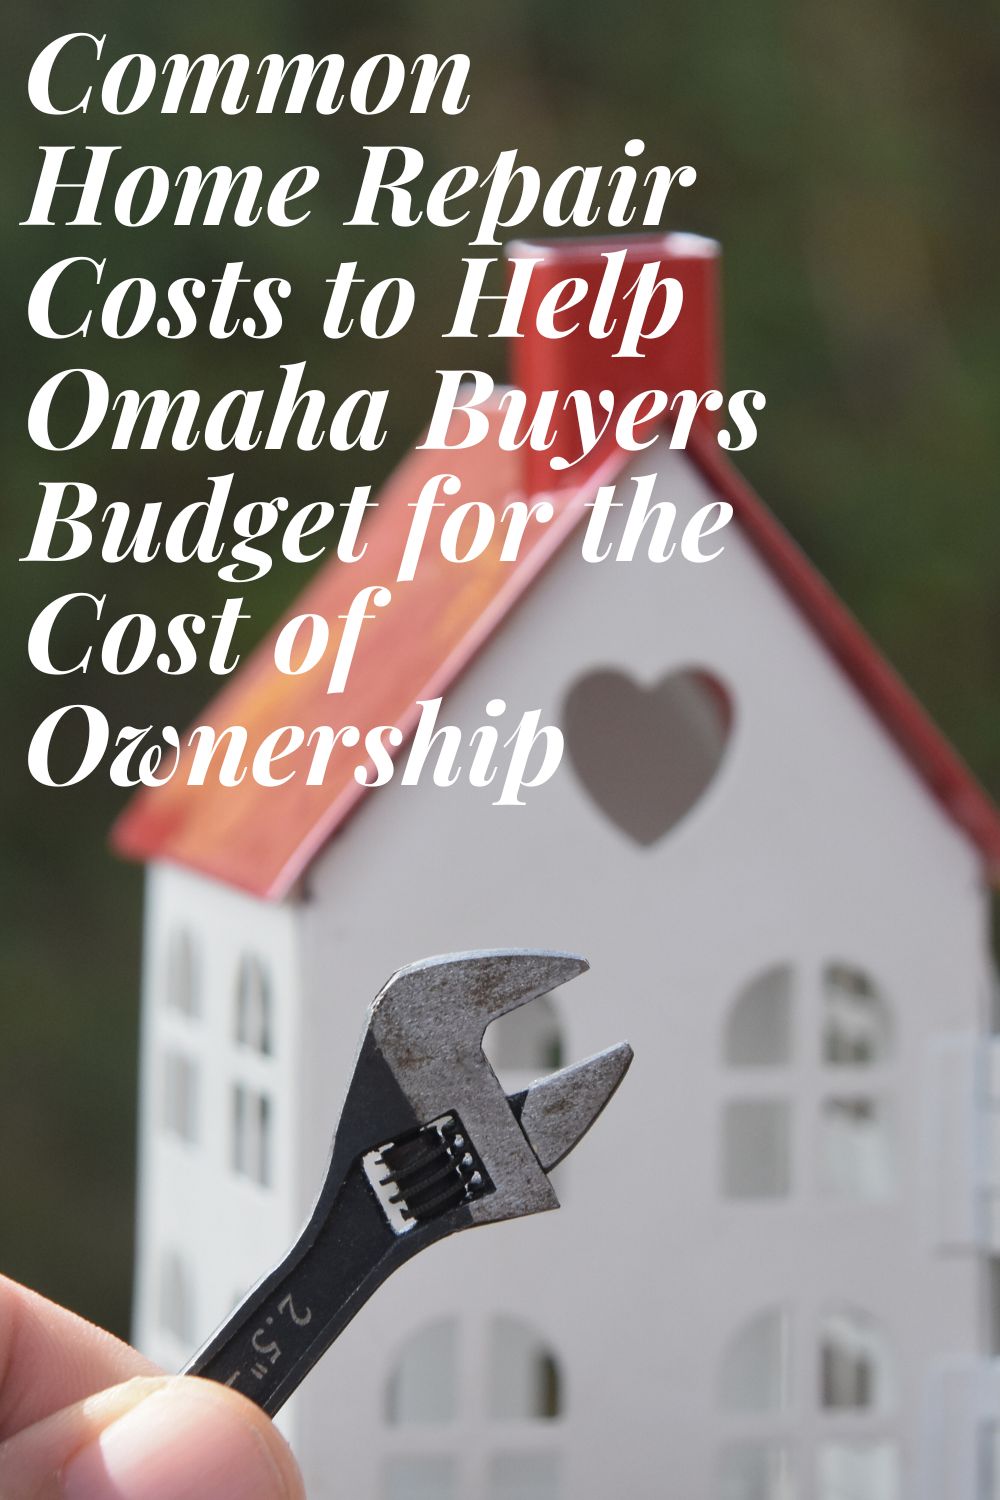 Common Home Repair Costs to Help Omaha Buyers Budget for the Cost of Ownership